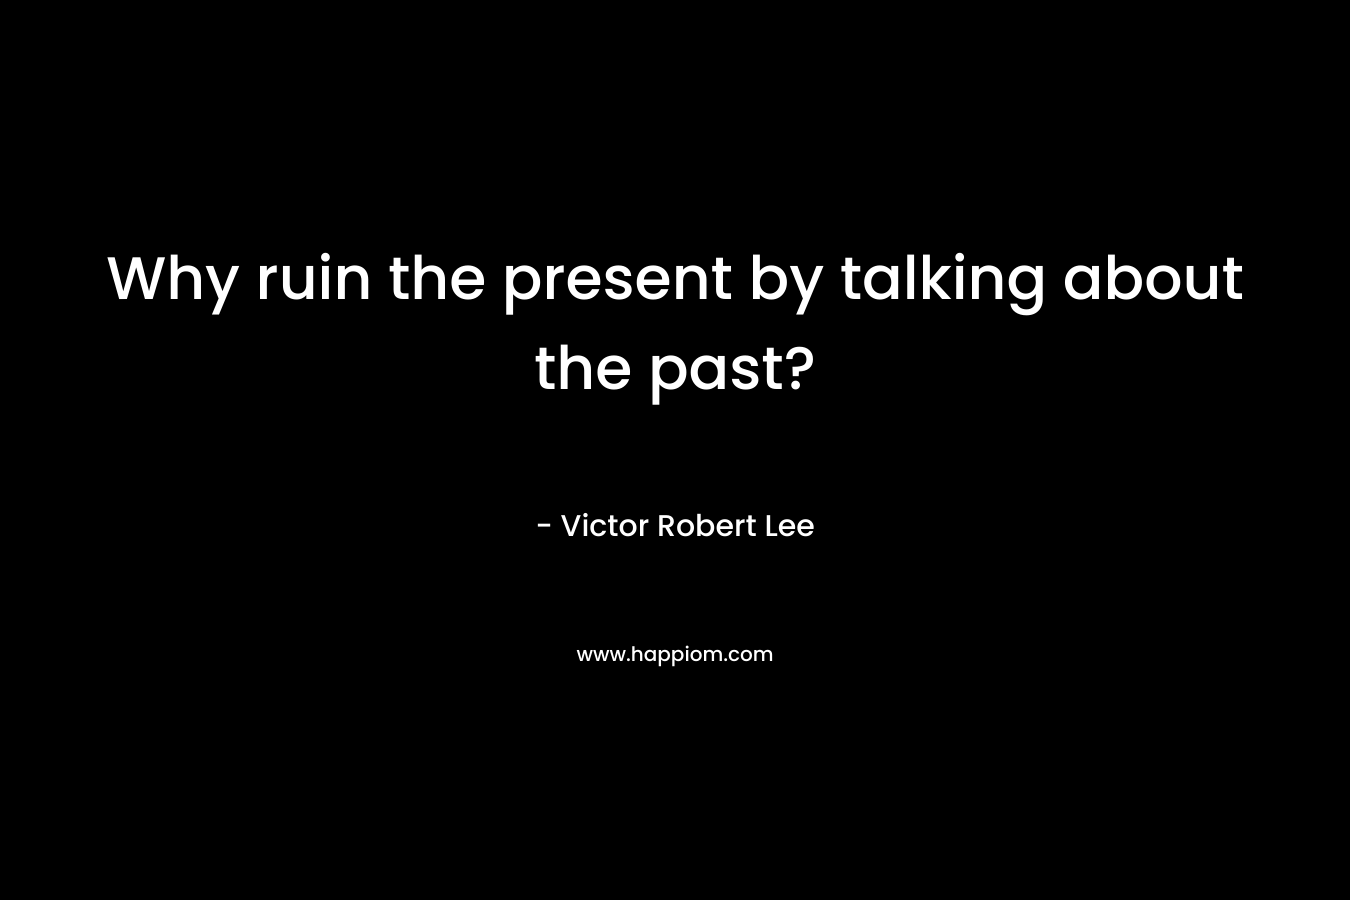 Why ruin the present by talking about the past?